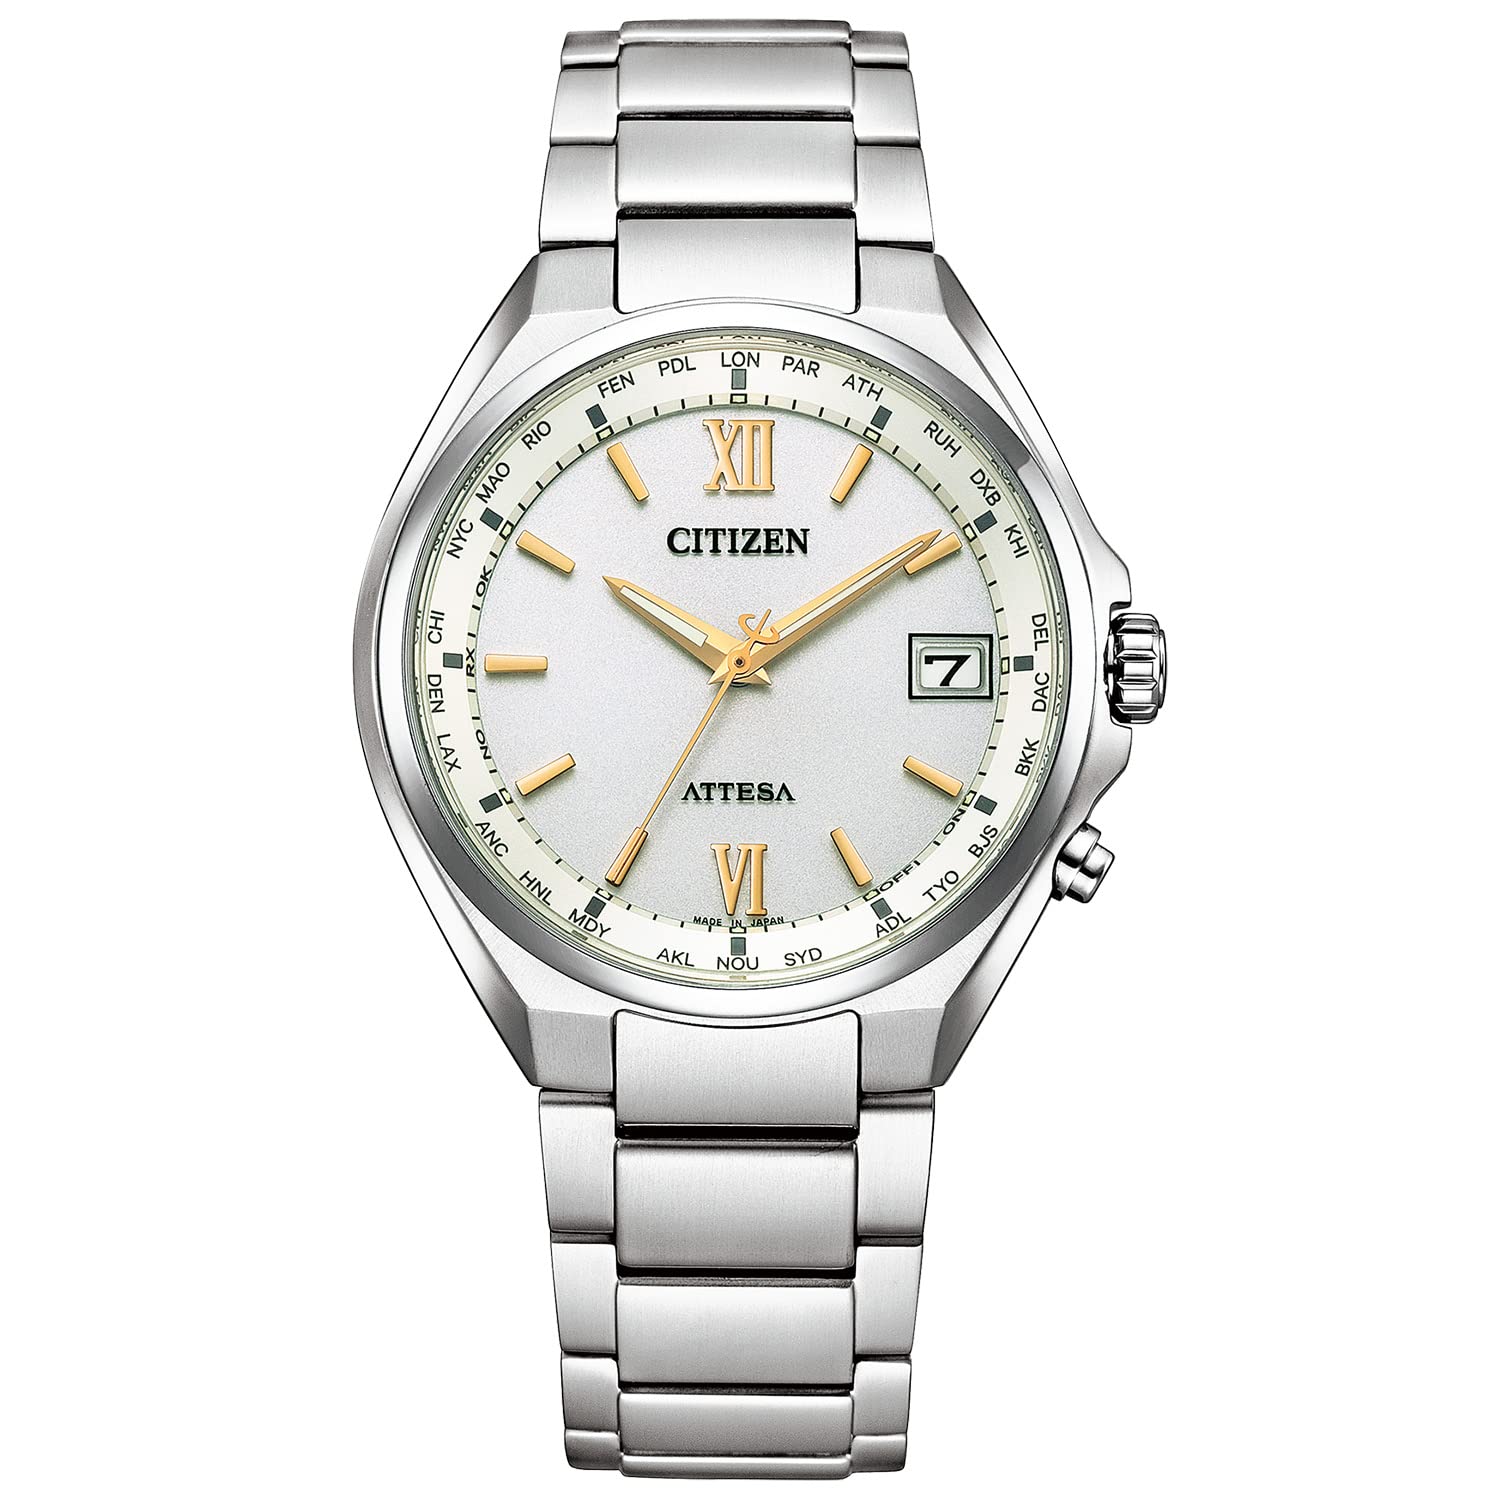 CITIZEN Watch ATTESA CB1120-50G CB1120-50C [Eco-Drive Radio Clock Direct Flight] Shipped from Japan Released in June 2022 (CB1120-50C)